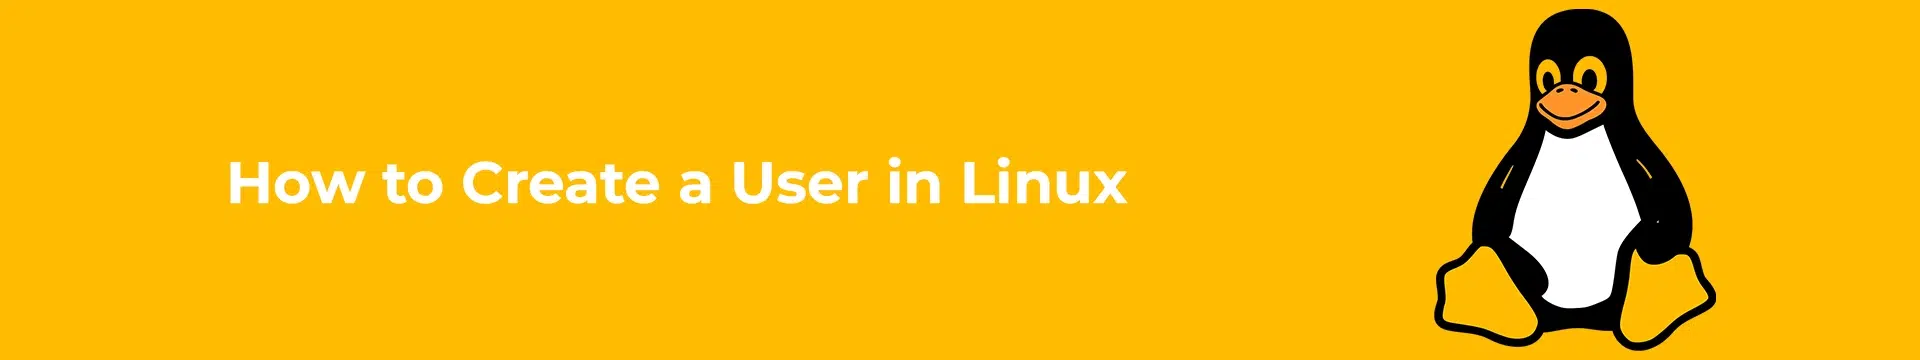 How to Create a User in Linux